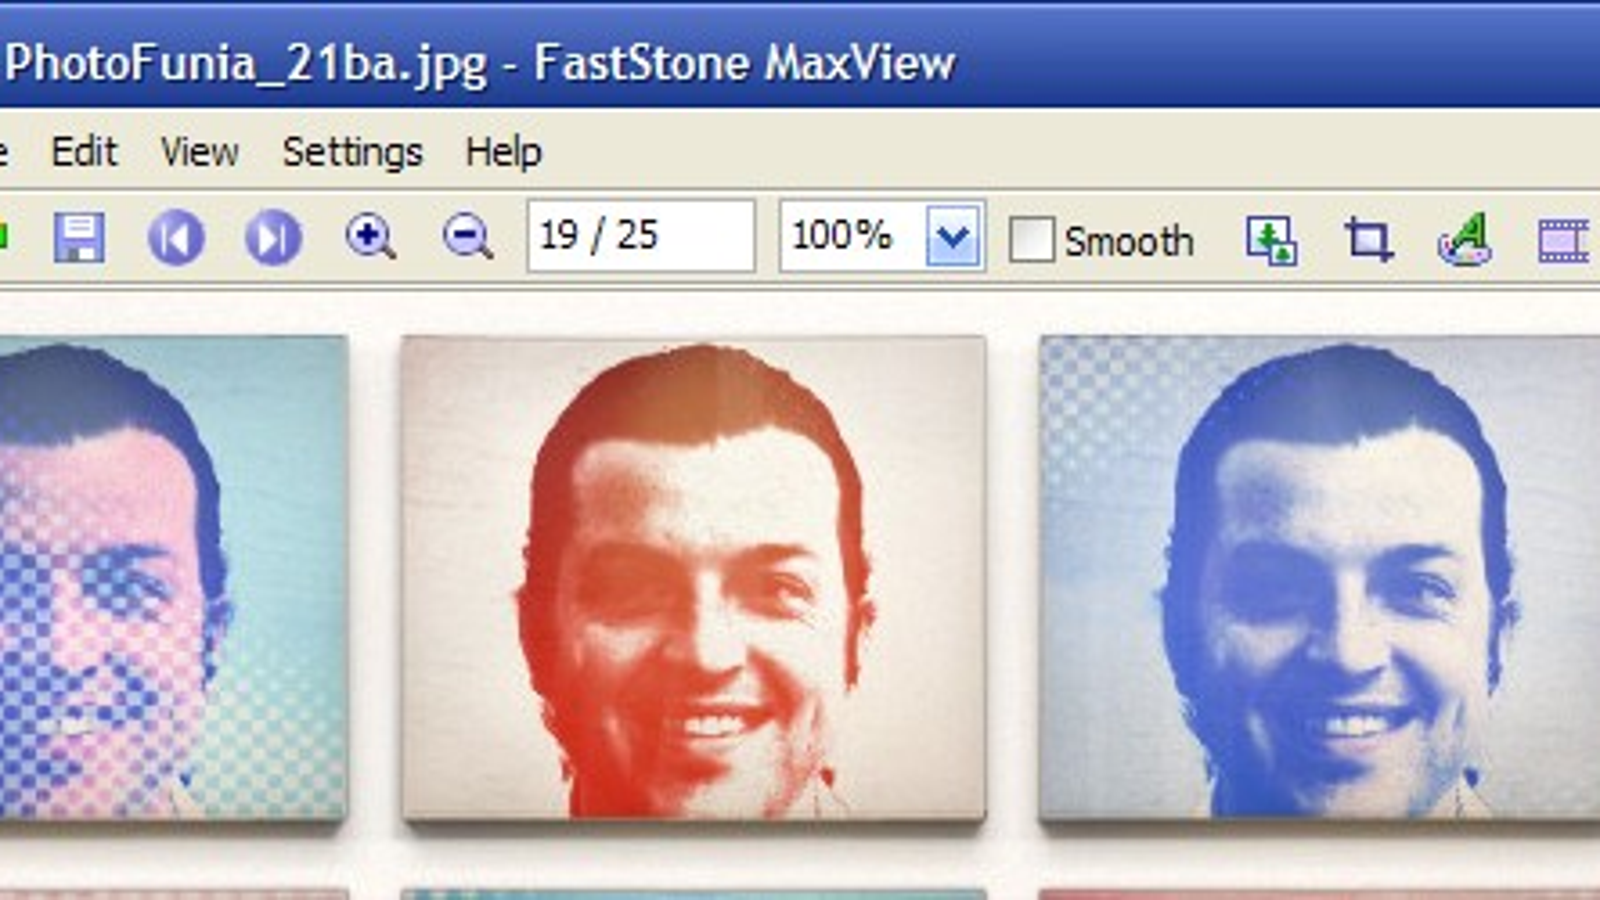 faststone maxview lossless rotation